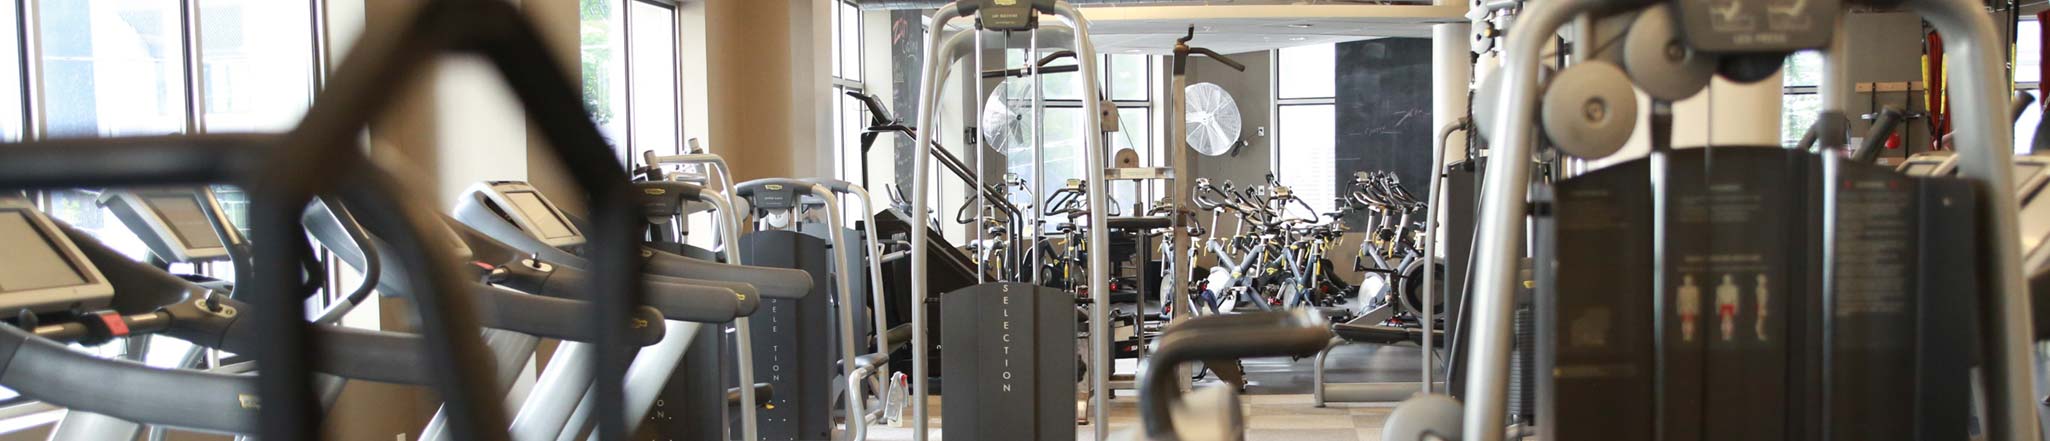 ZUM Fitness has an open gym with cardio and weigh machines, available during business hours